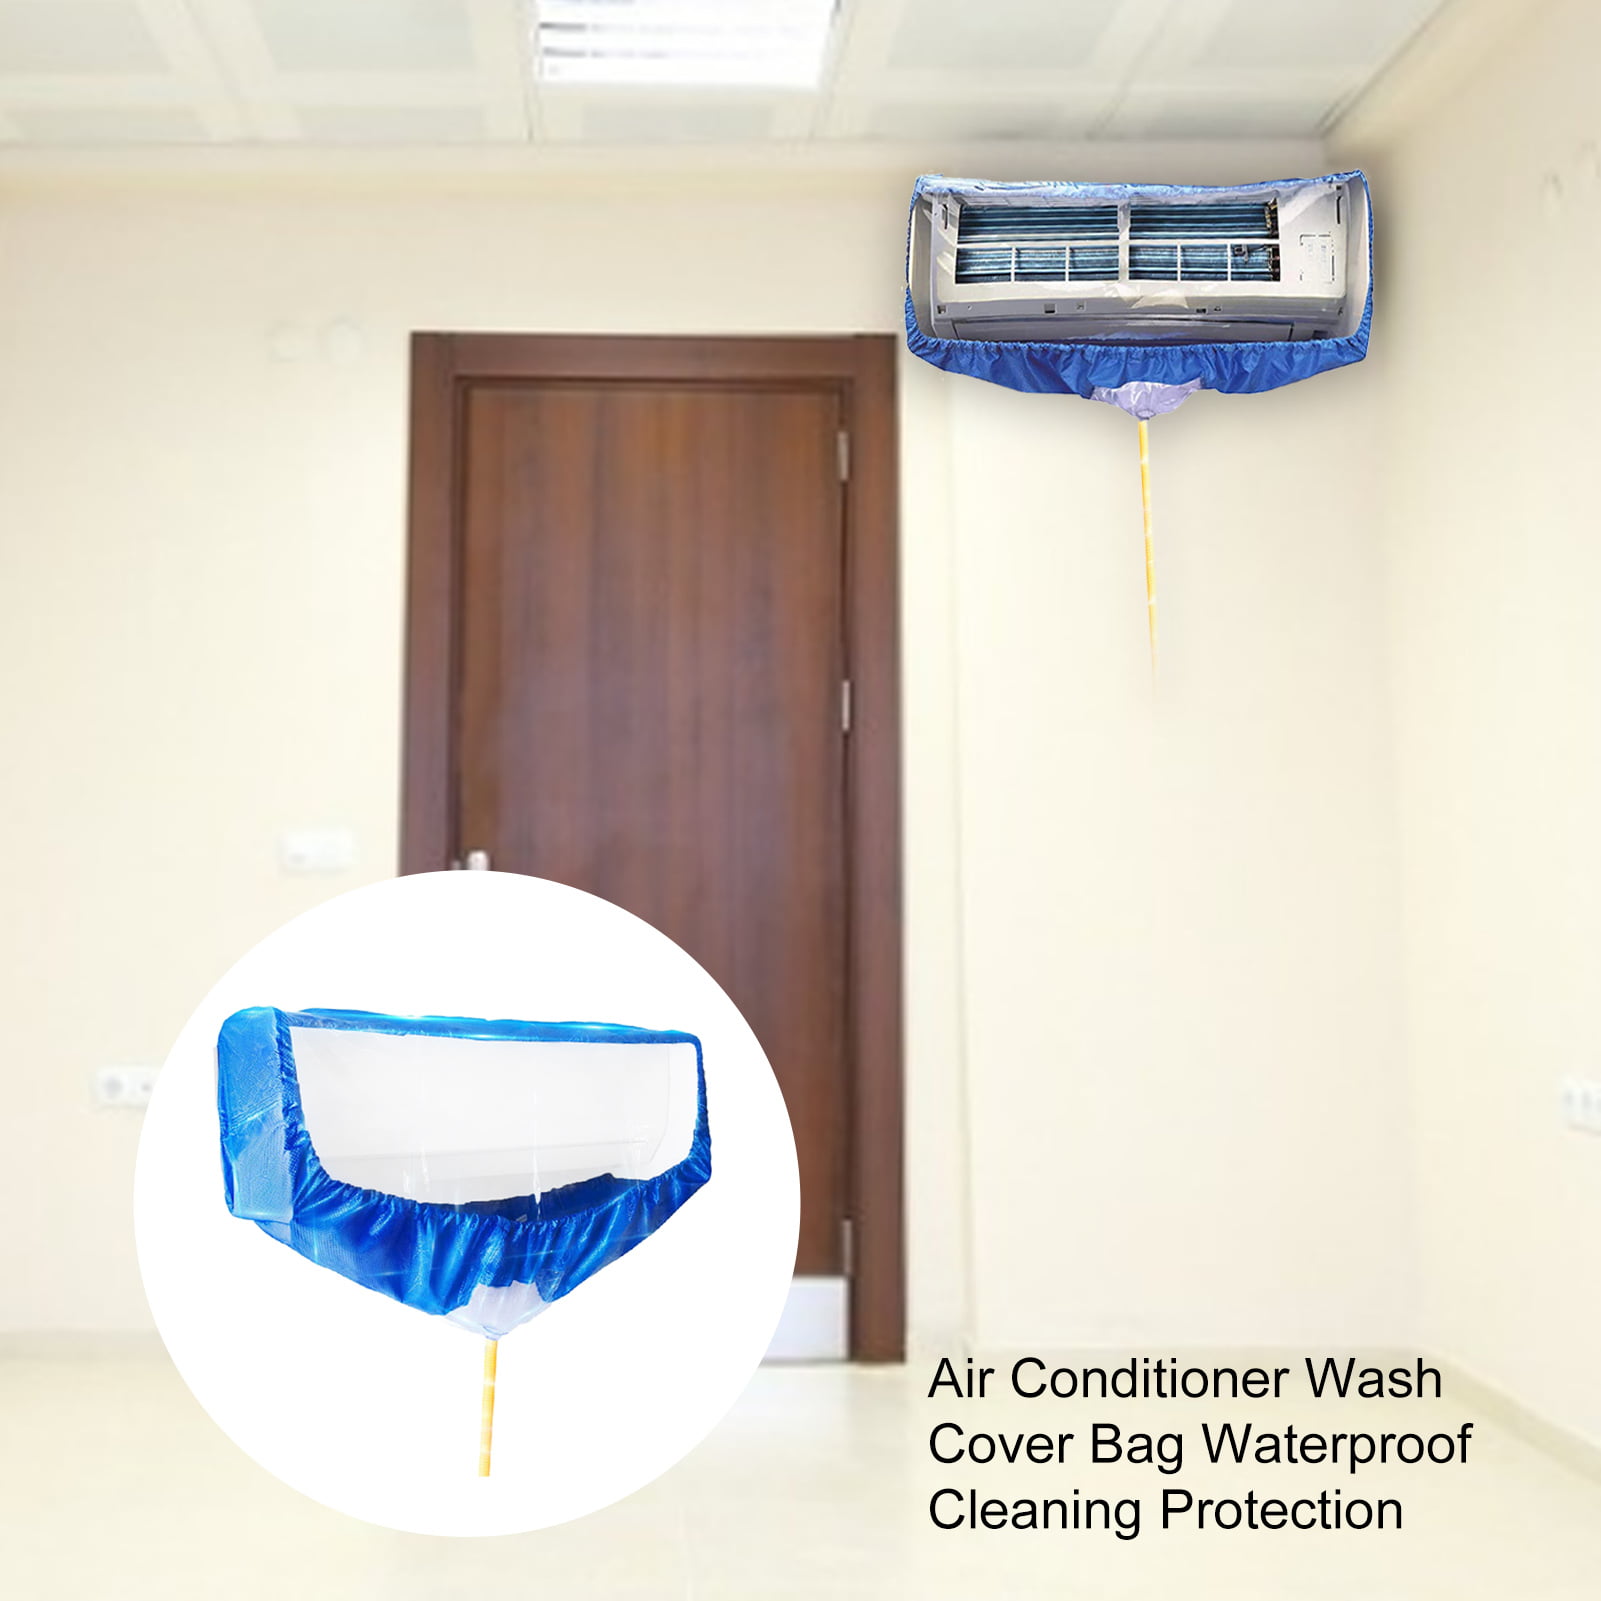 sunflowe Air Conditioner Waterproof Cleaning Cover Kit With Two Sides Support Plates Dust Washing Clean Protector Bag For Mini-Split AC Units,Wall Mounted Air Conditioning Service Bag With Water Pipe 